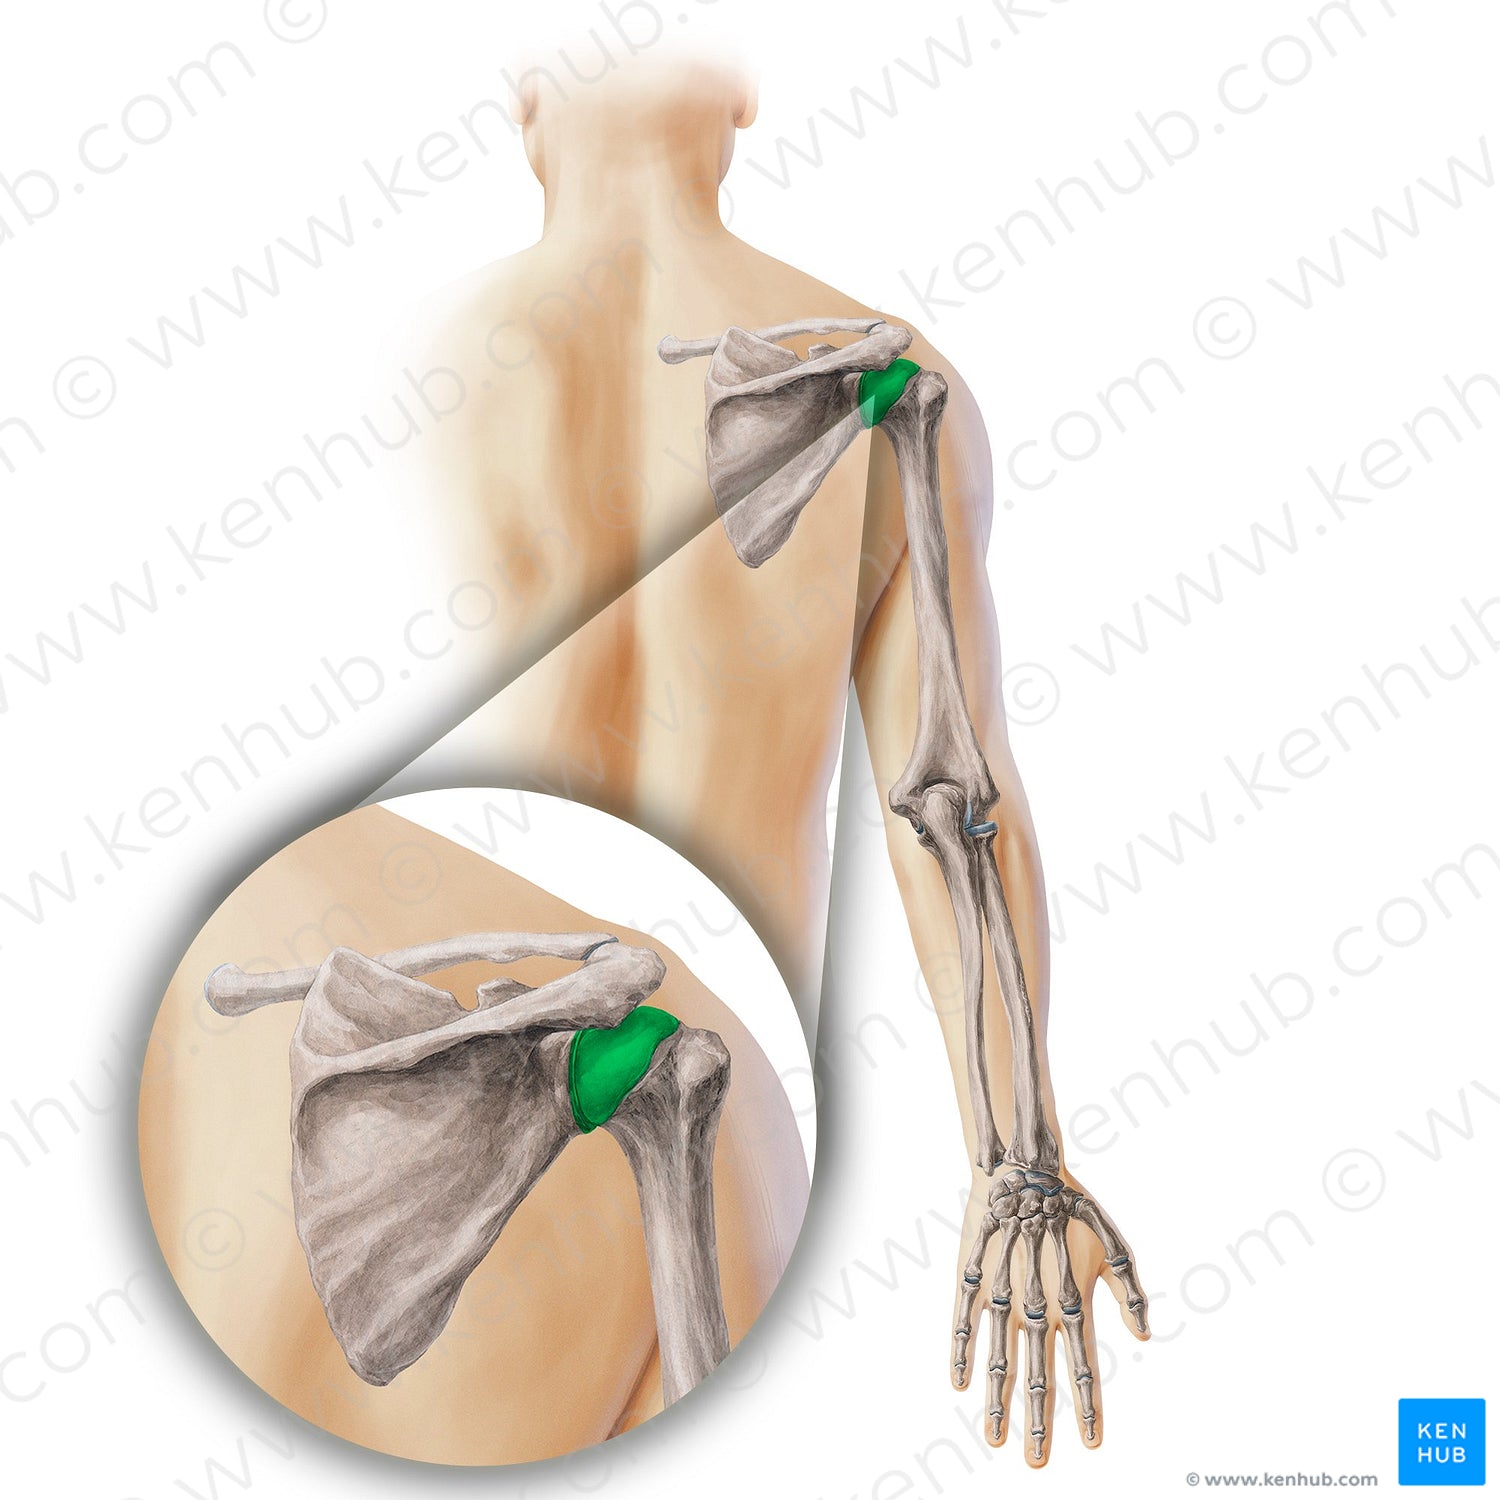 Glenohumeral joint (#19890)